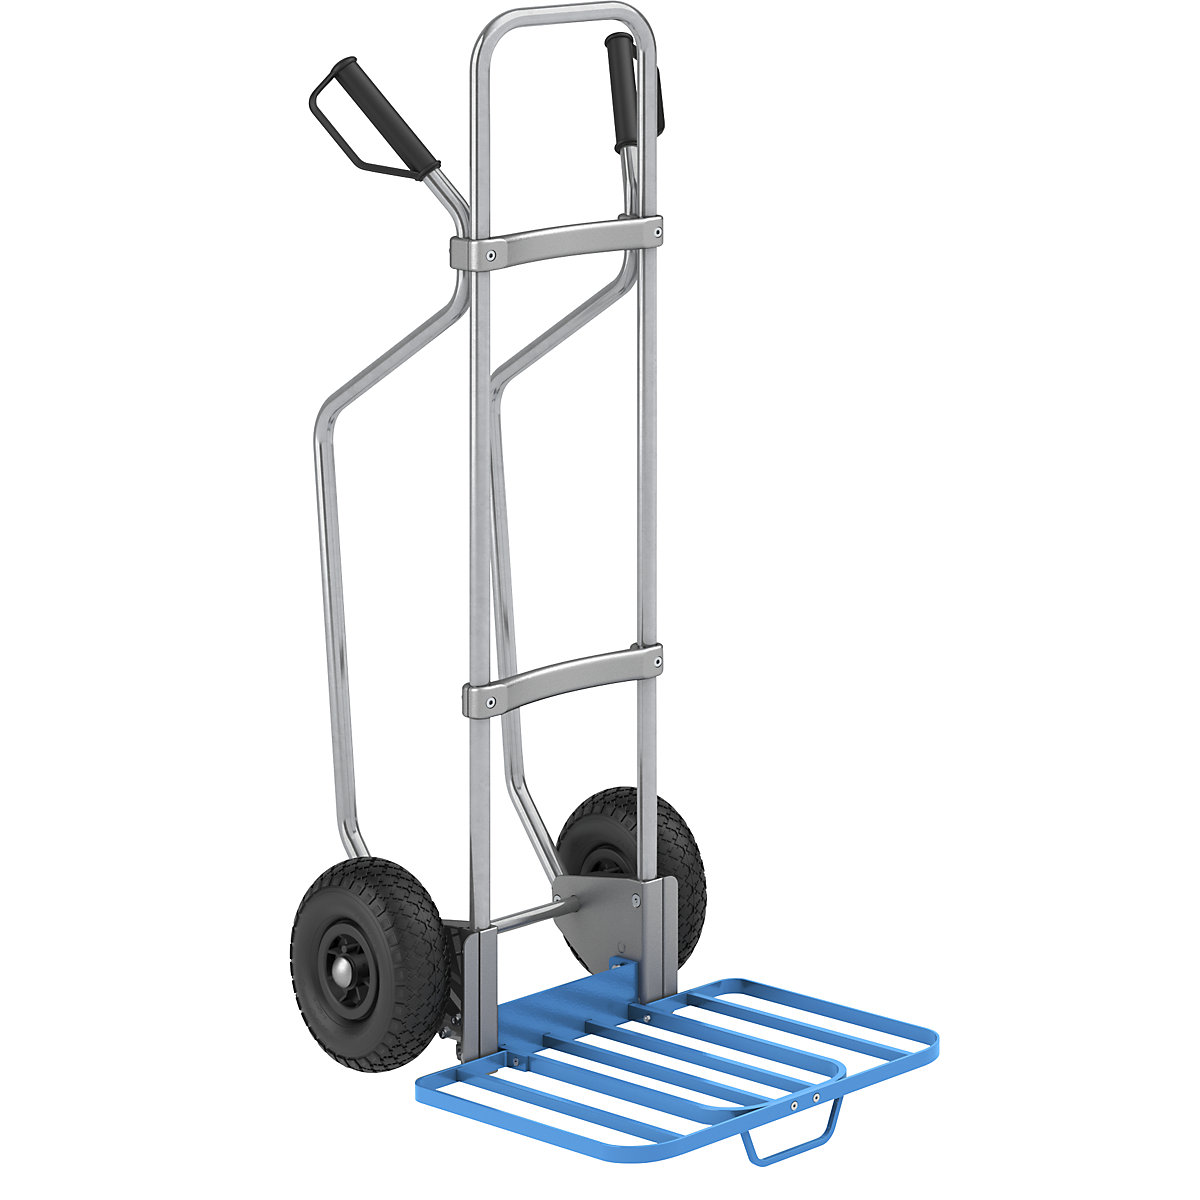 Sack truck with runners, zinc plated – eurokraft pro, parcel footplate WxD 430 x 450 mm, blue, with handle, pneumatic tyres-4